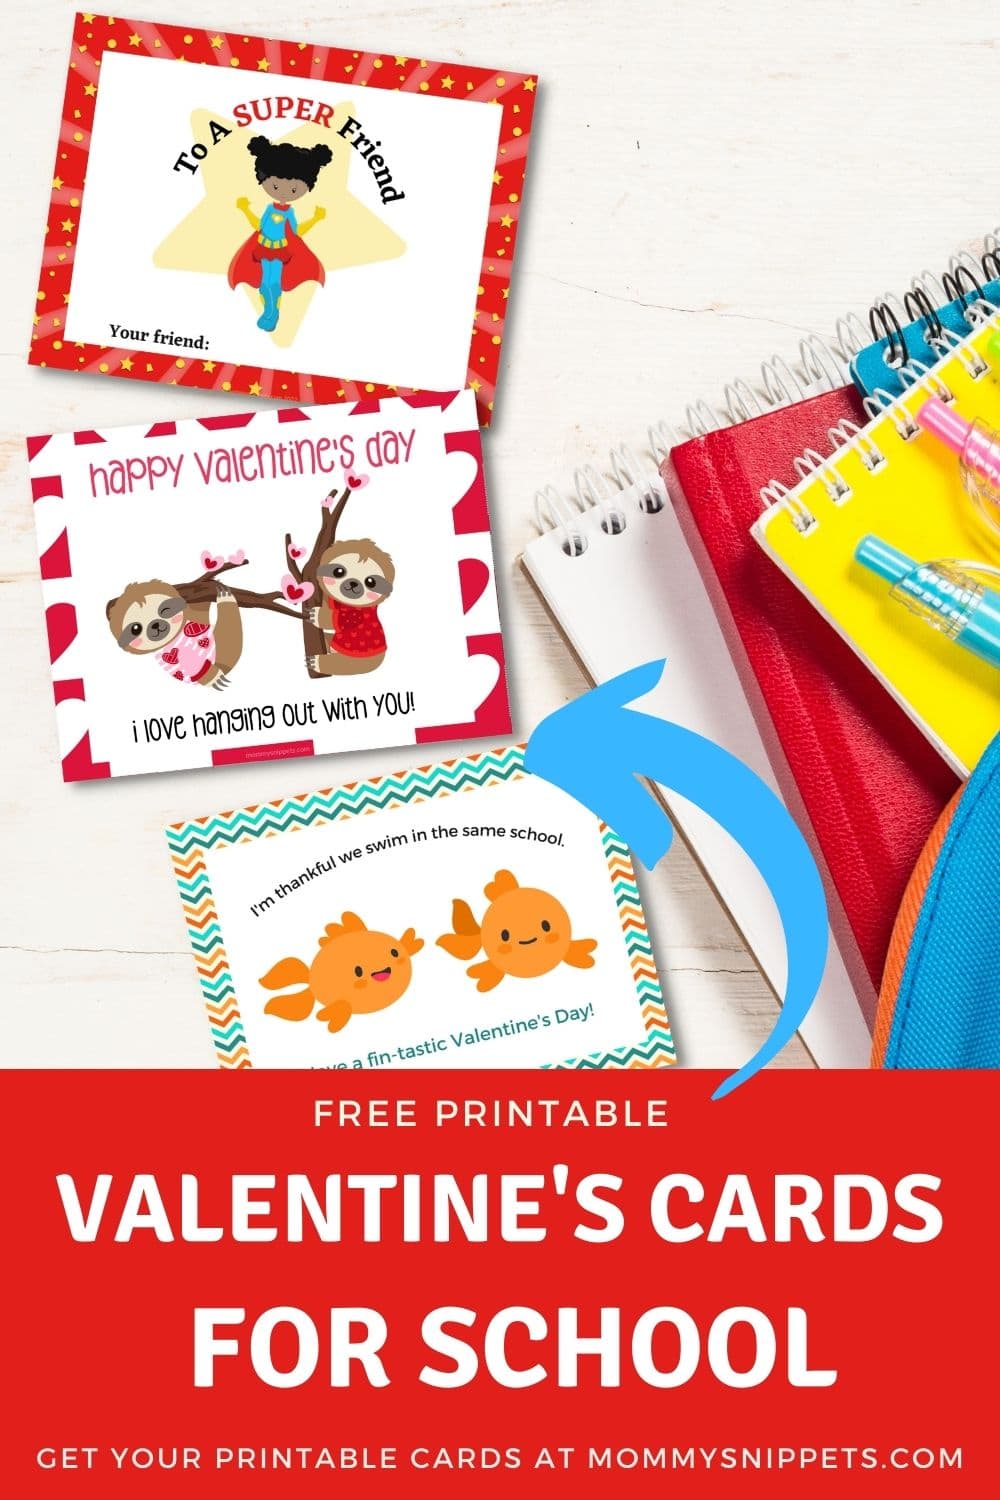 Printable Valentine's Day Cards for School